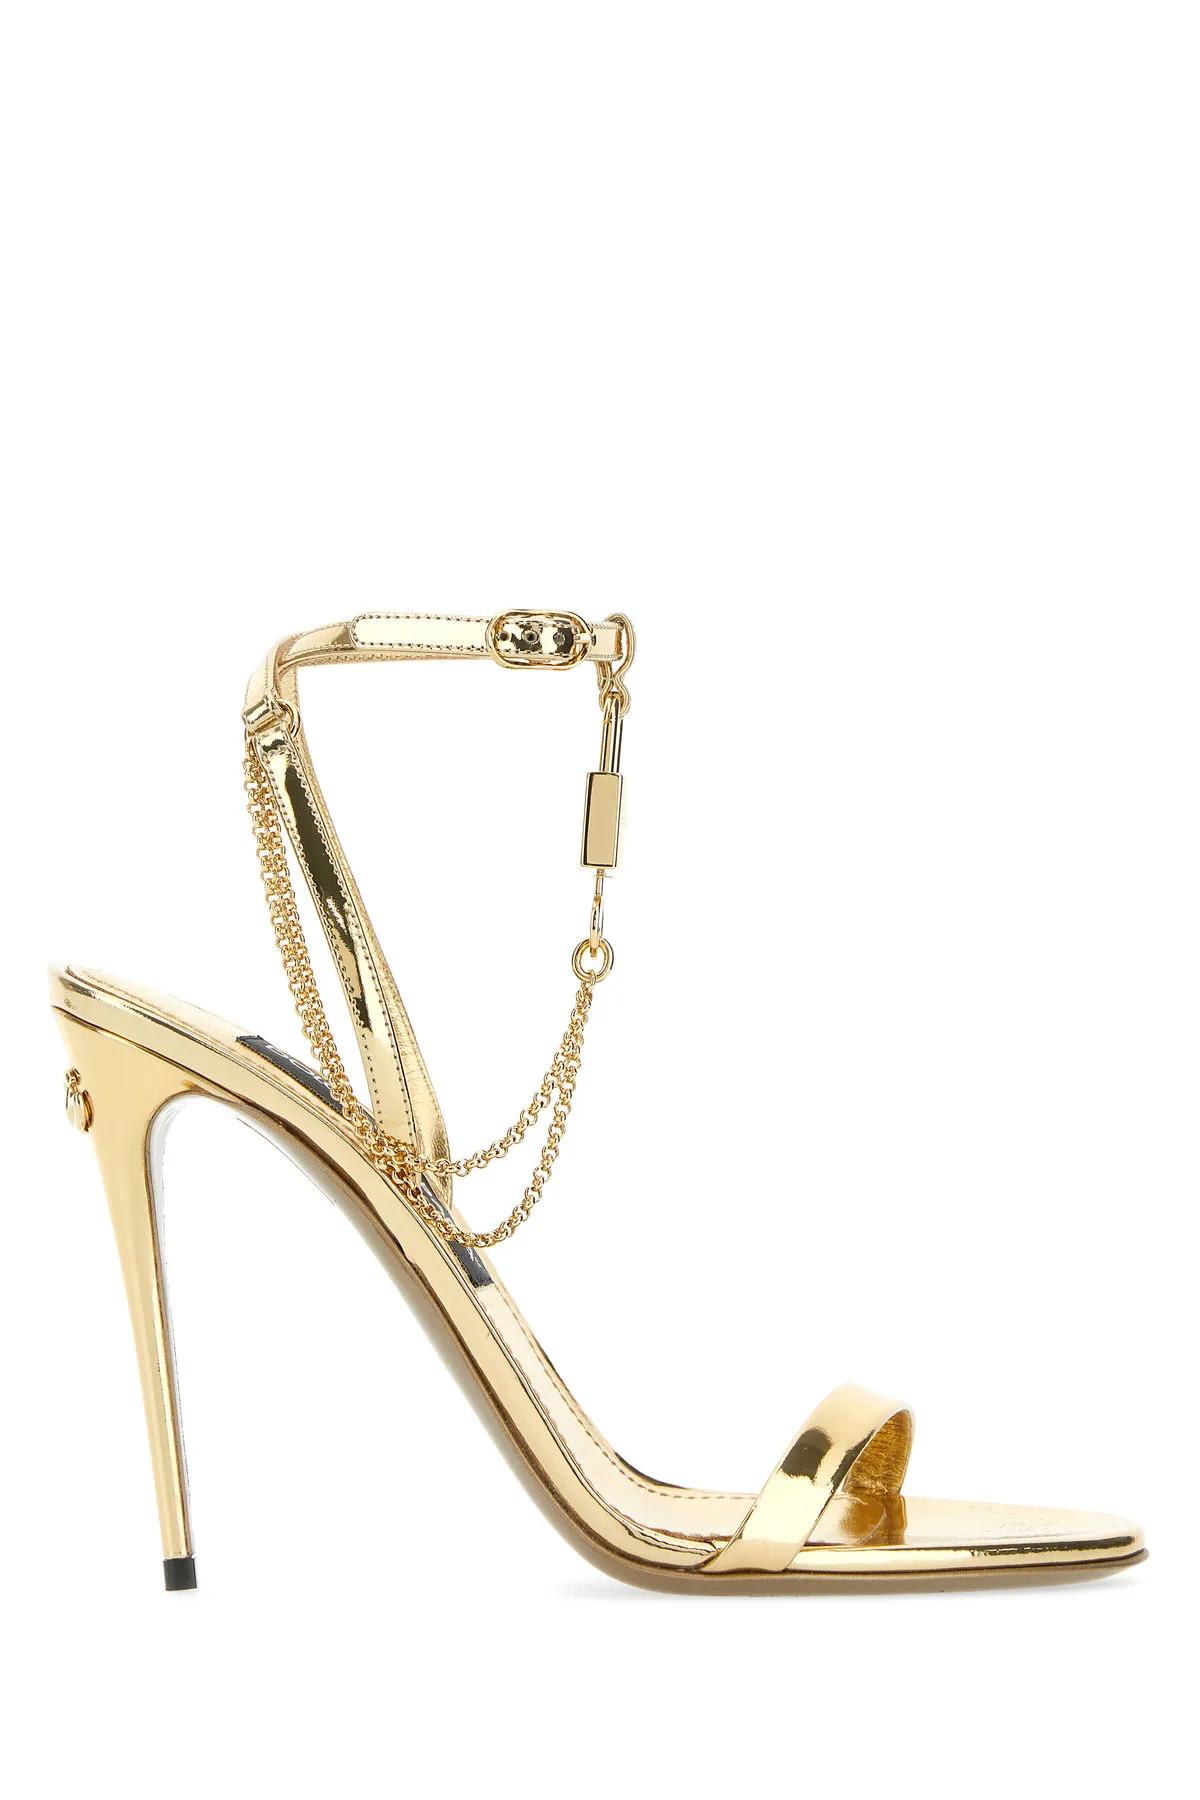 DOLCE & GABBANA GOLD LEATHER KEIRA SANDALS